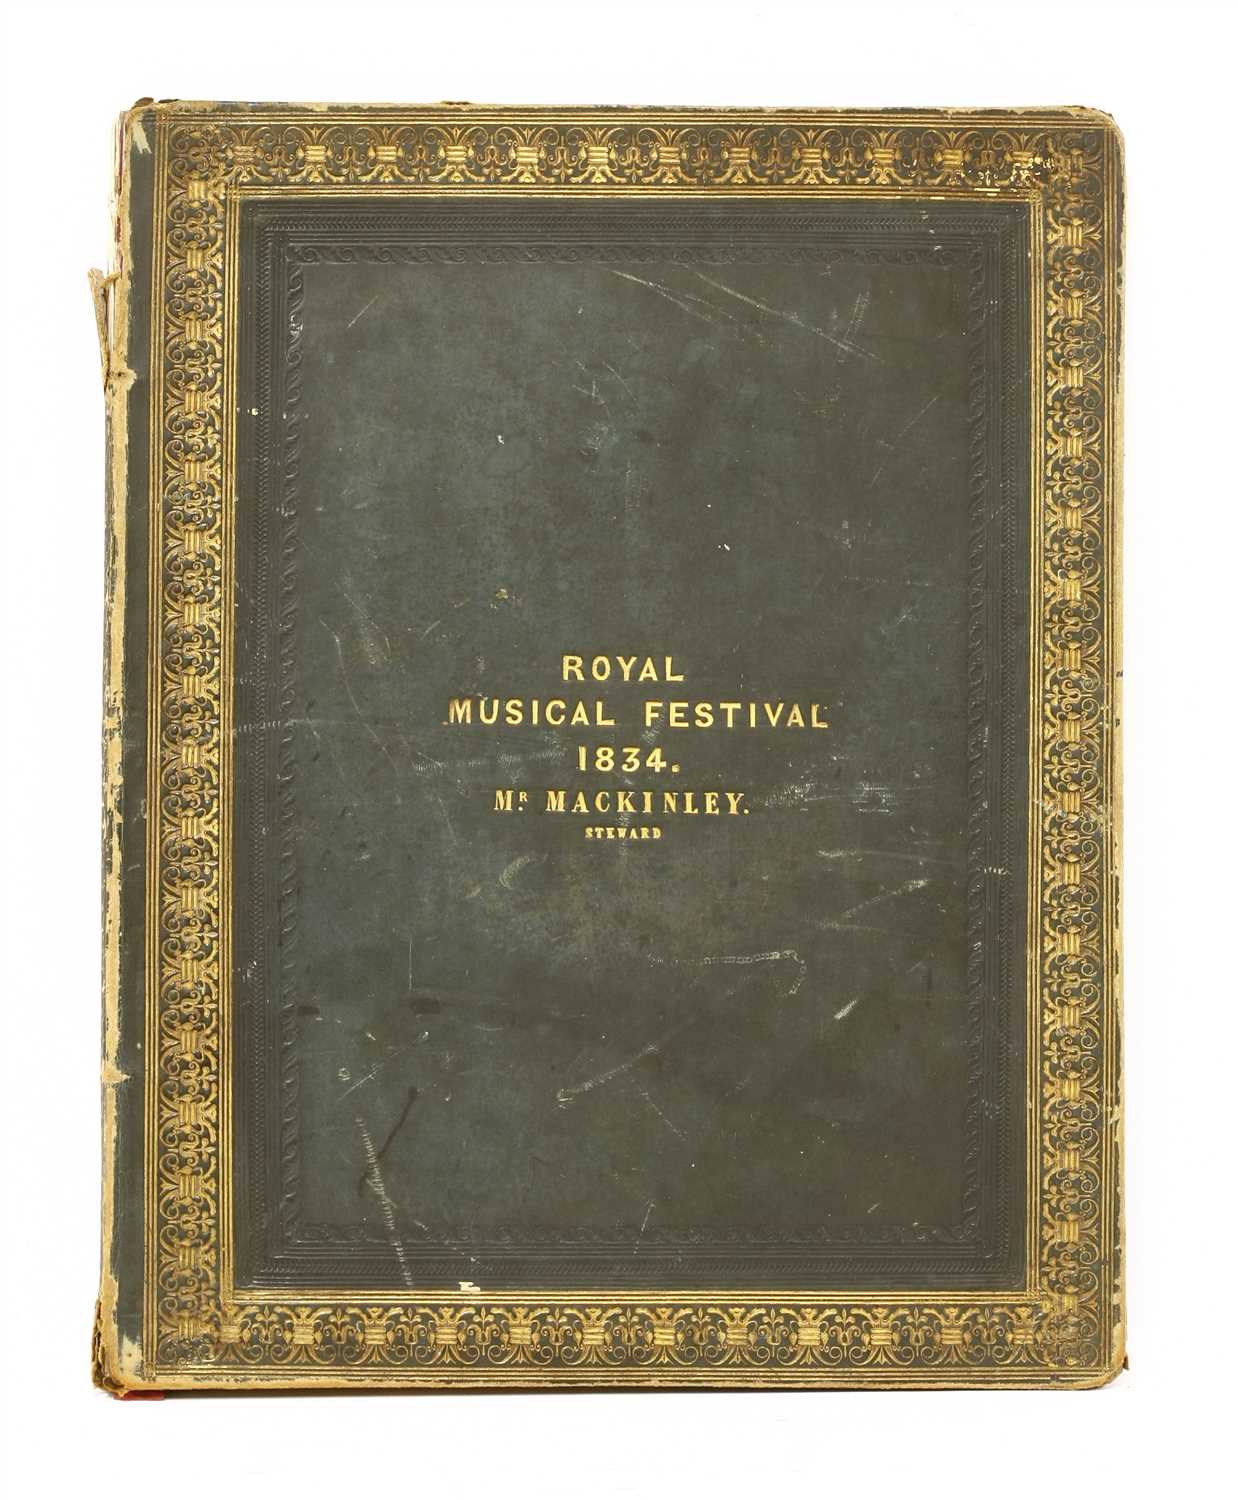 Parry, John: An account of the Royal Musical Festival: Held in Westminster Abbey, 1834.